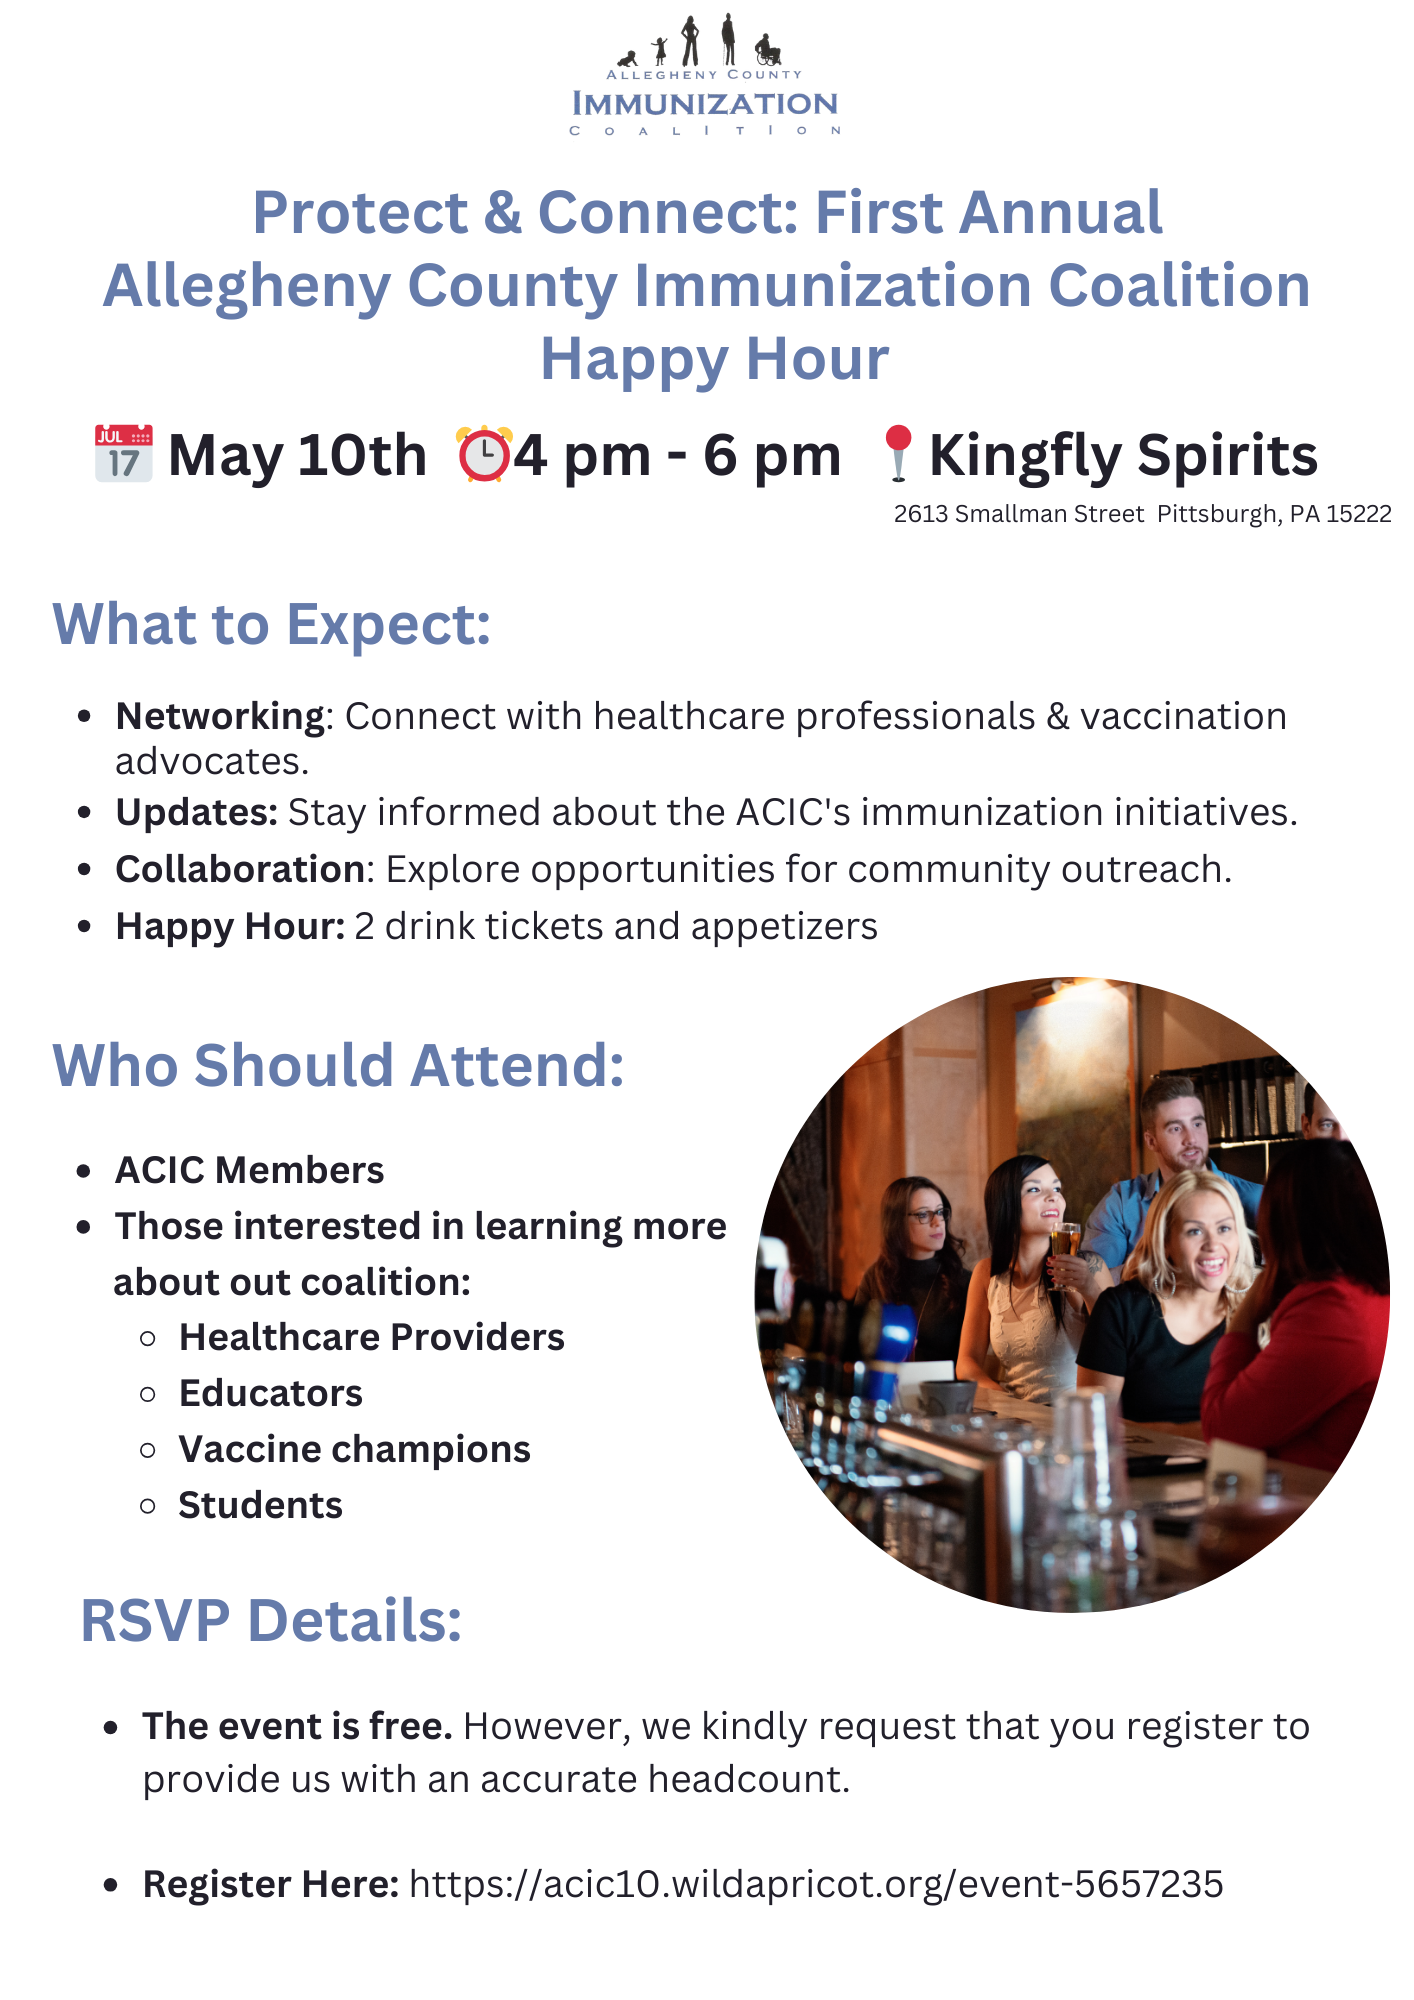 'Protect & Connect': ACIC's Inaugural Happy Hour Gathering for Immunization Advocates